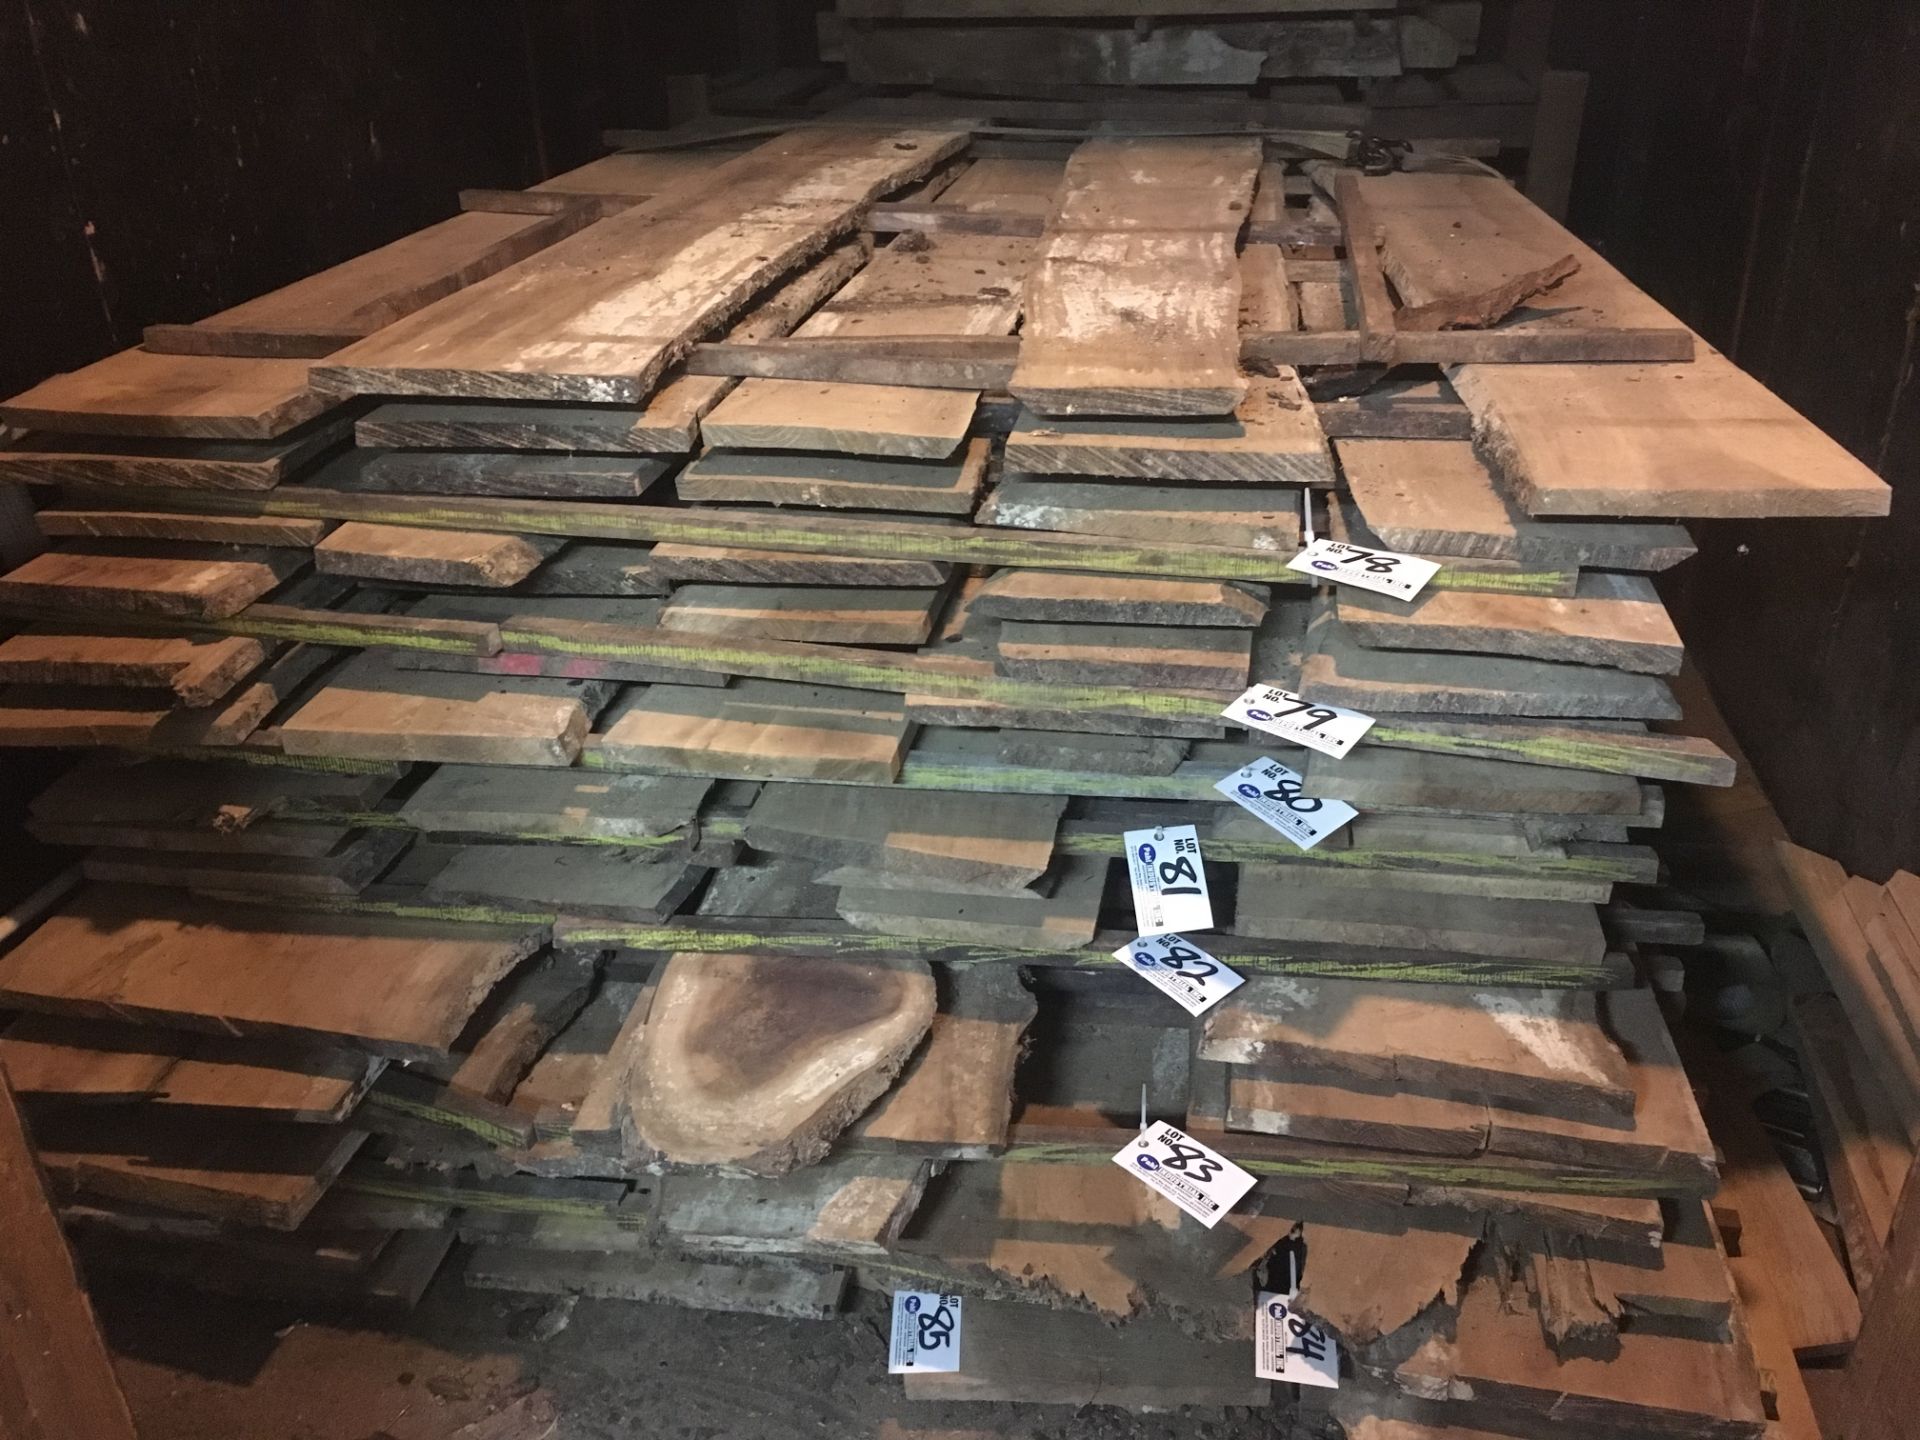 9 Slabs of 1" Thick kiln dried Myrtlewood 6' x 9-12" wide - approximately 50 bd ft